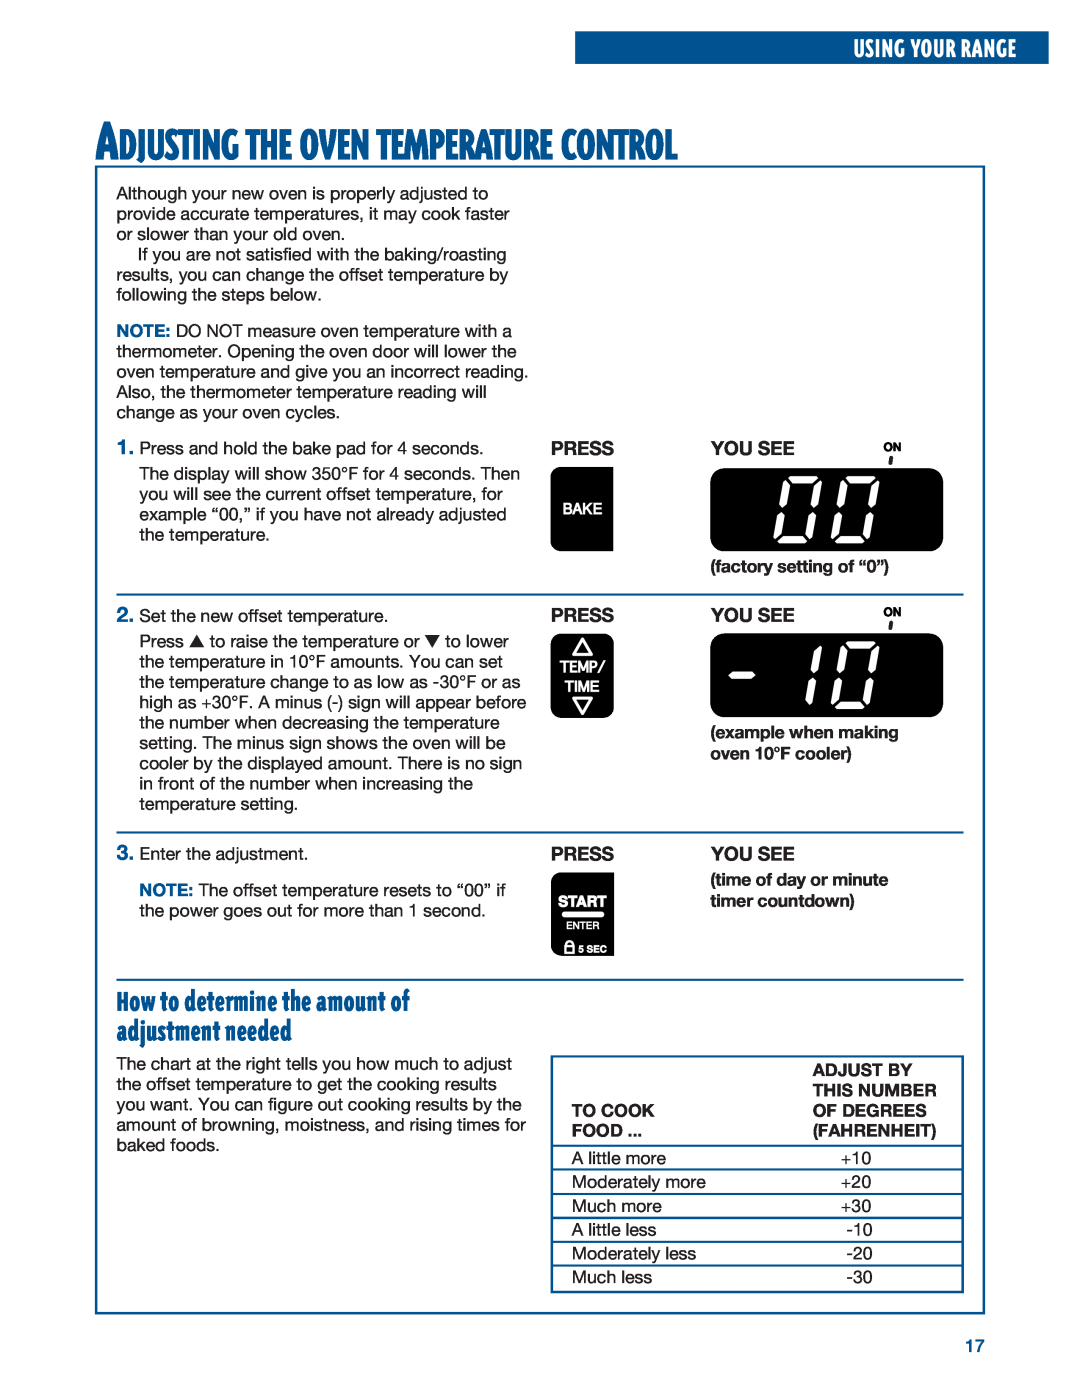 Whirlpool RF315PXE warranty You See, Press, timer countdown, Adjusting The Oven Temperature Control, Using Your Range 